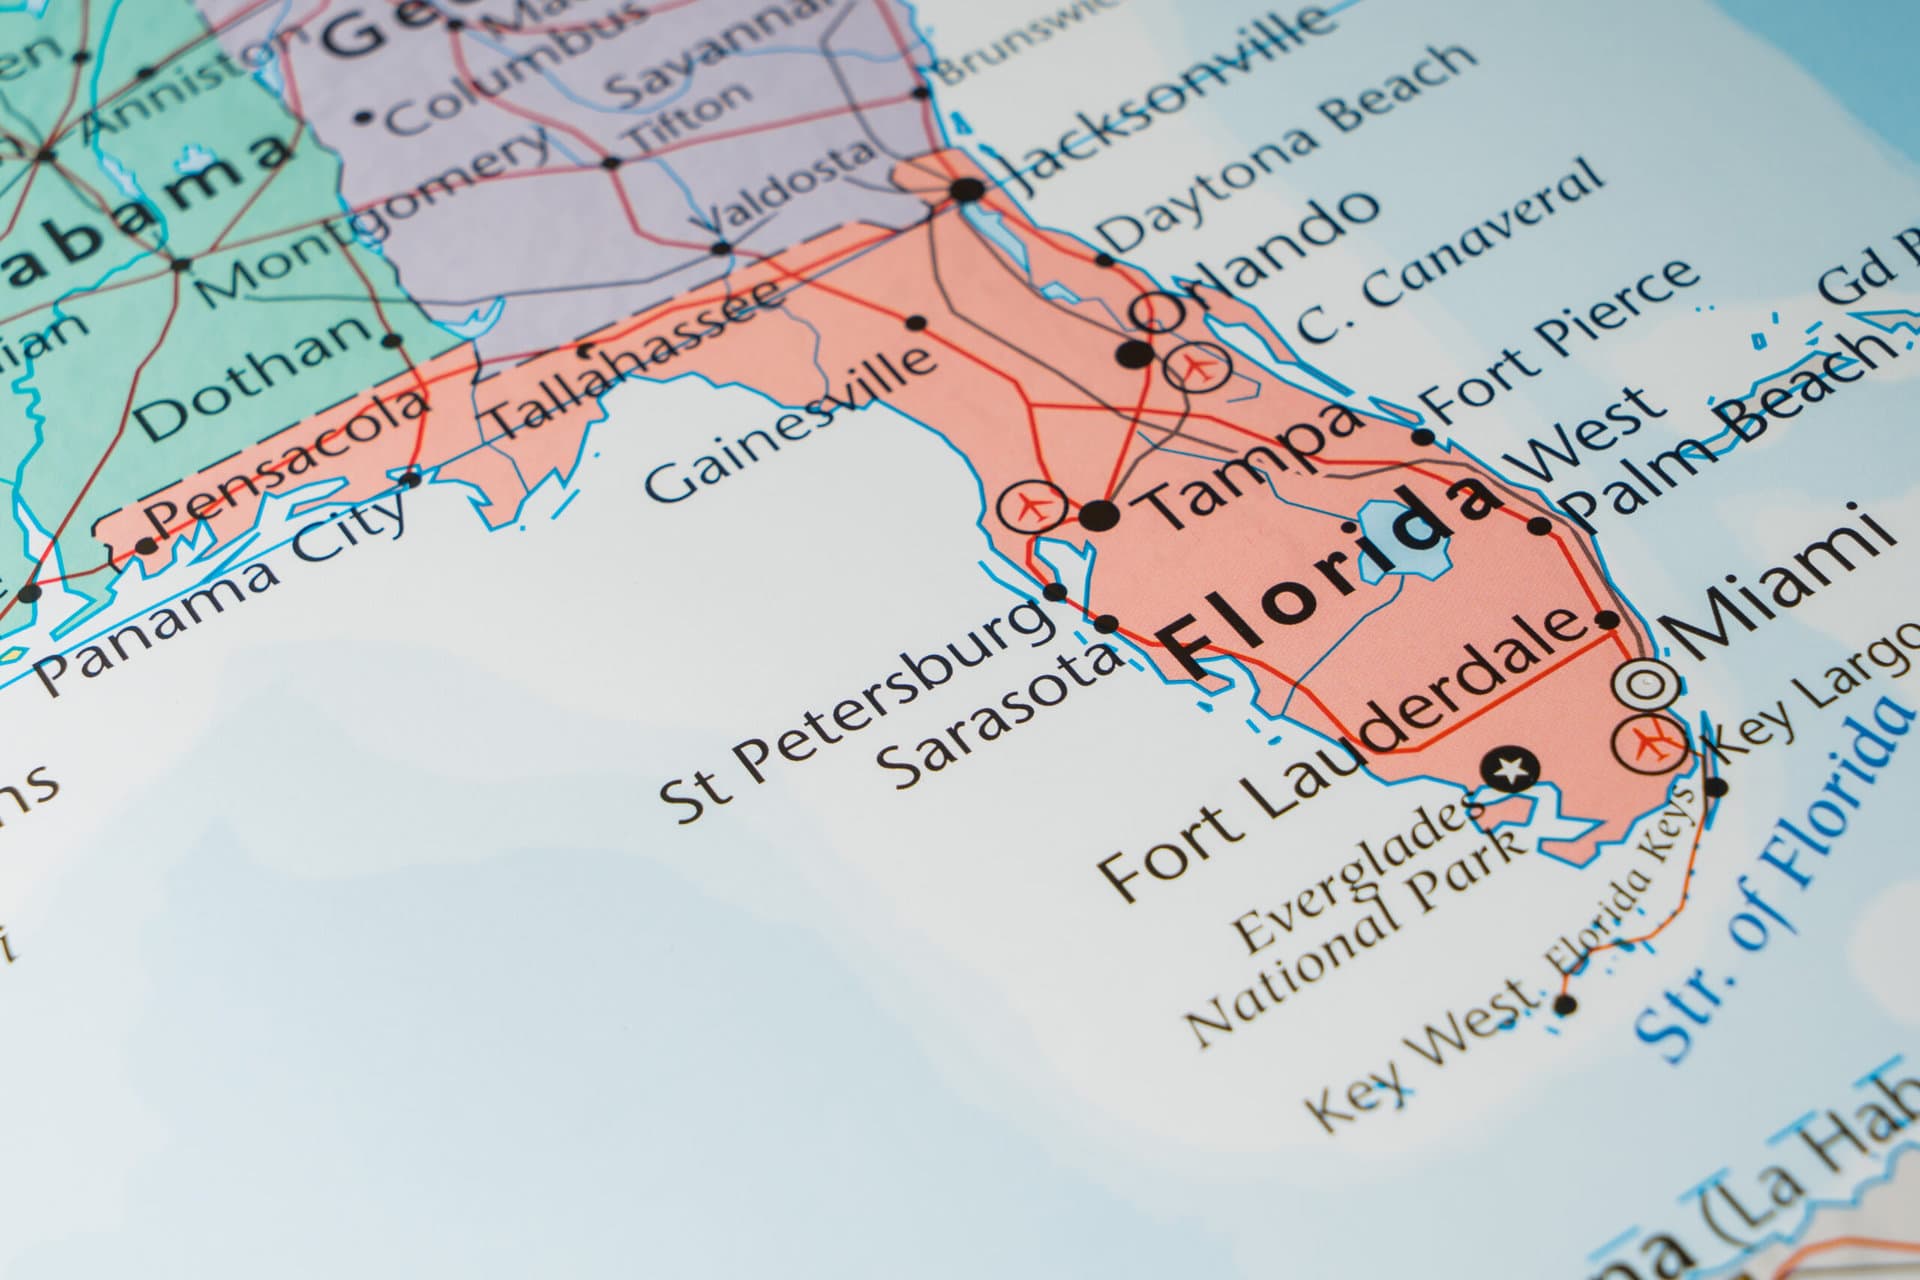 DSCR Loans Florida: What Are They and How Do I Qualify?